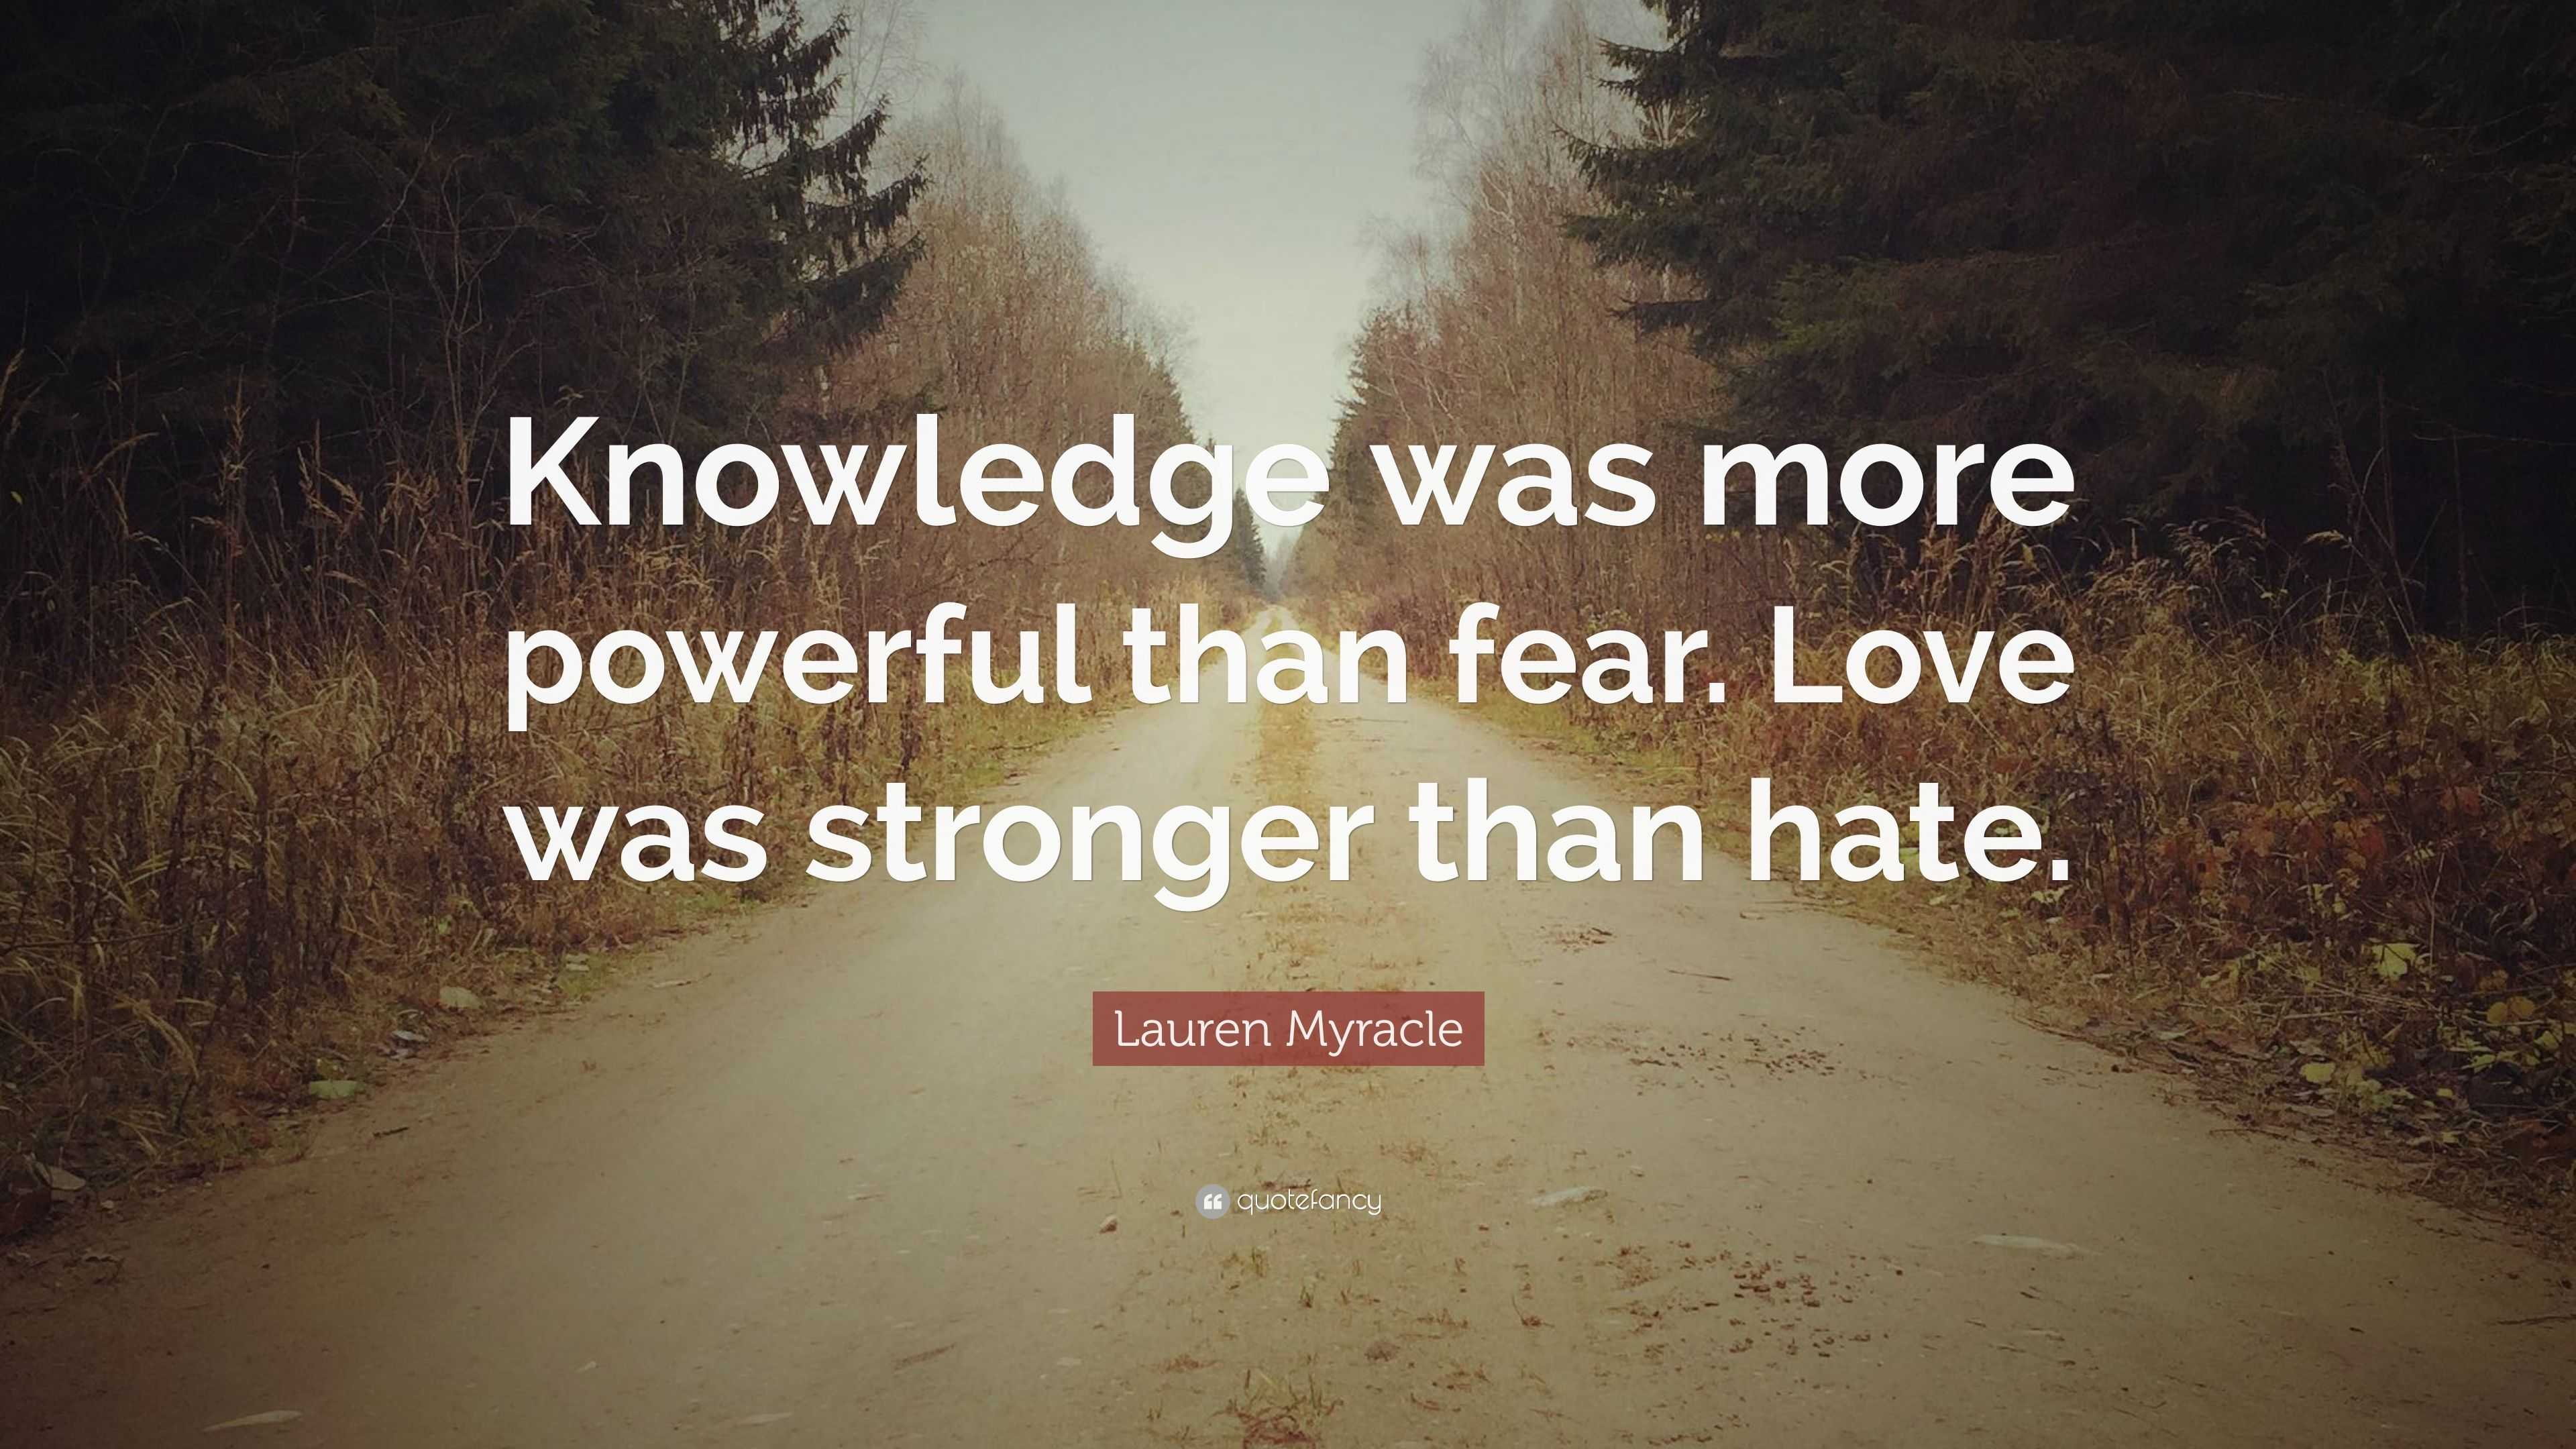 Lauren Myracle Quote “Knowledge was more powerful than fear Love was stronger than